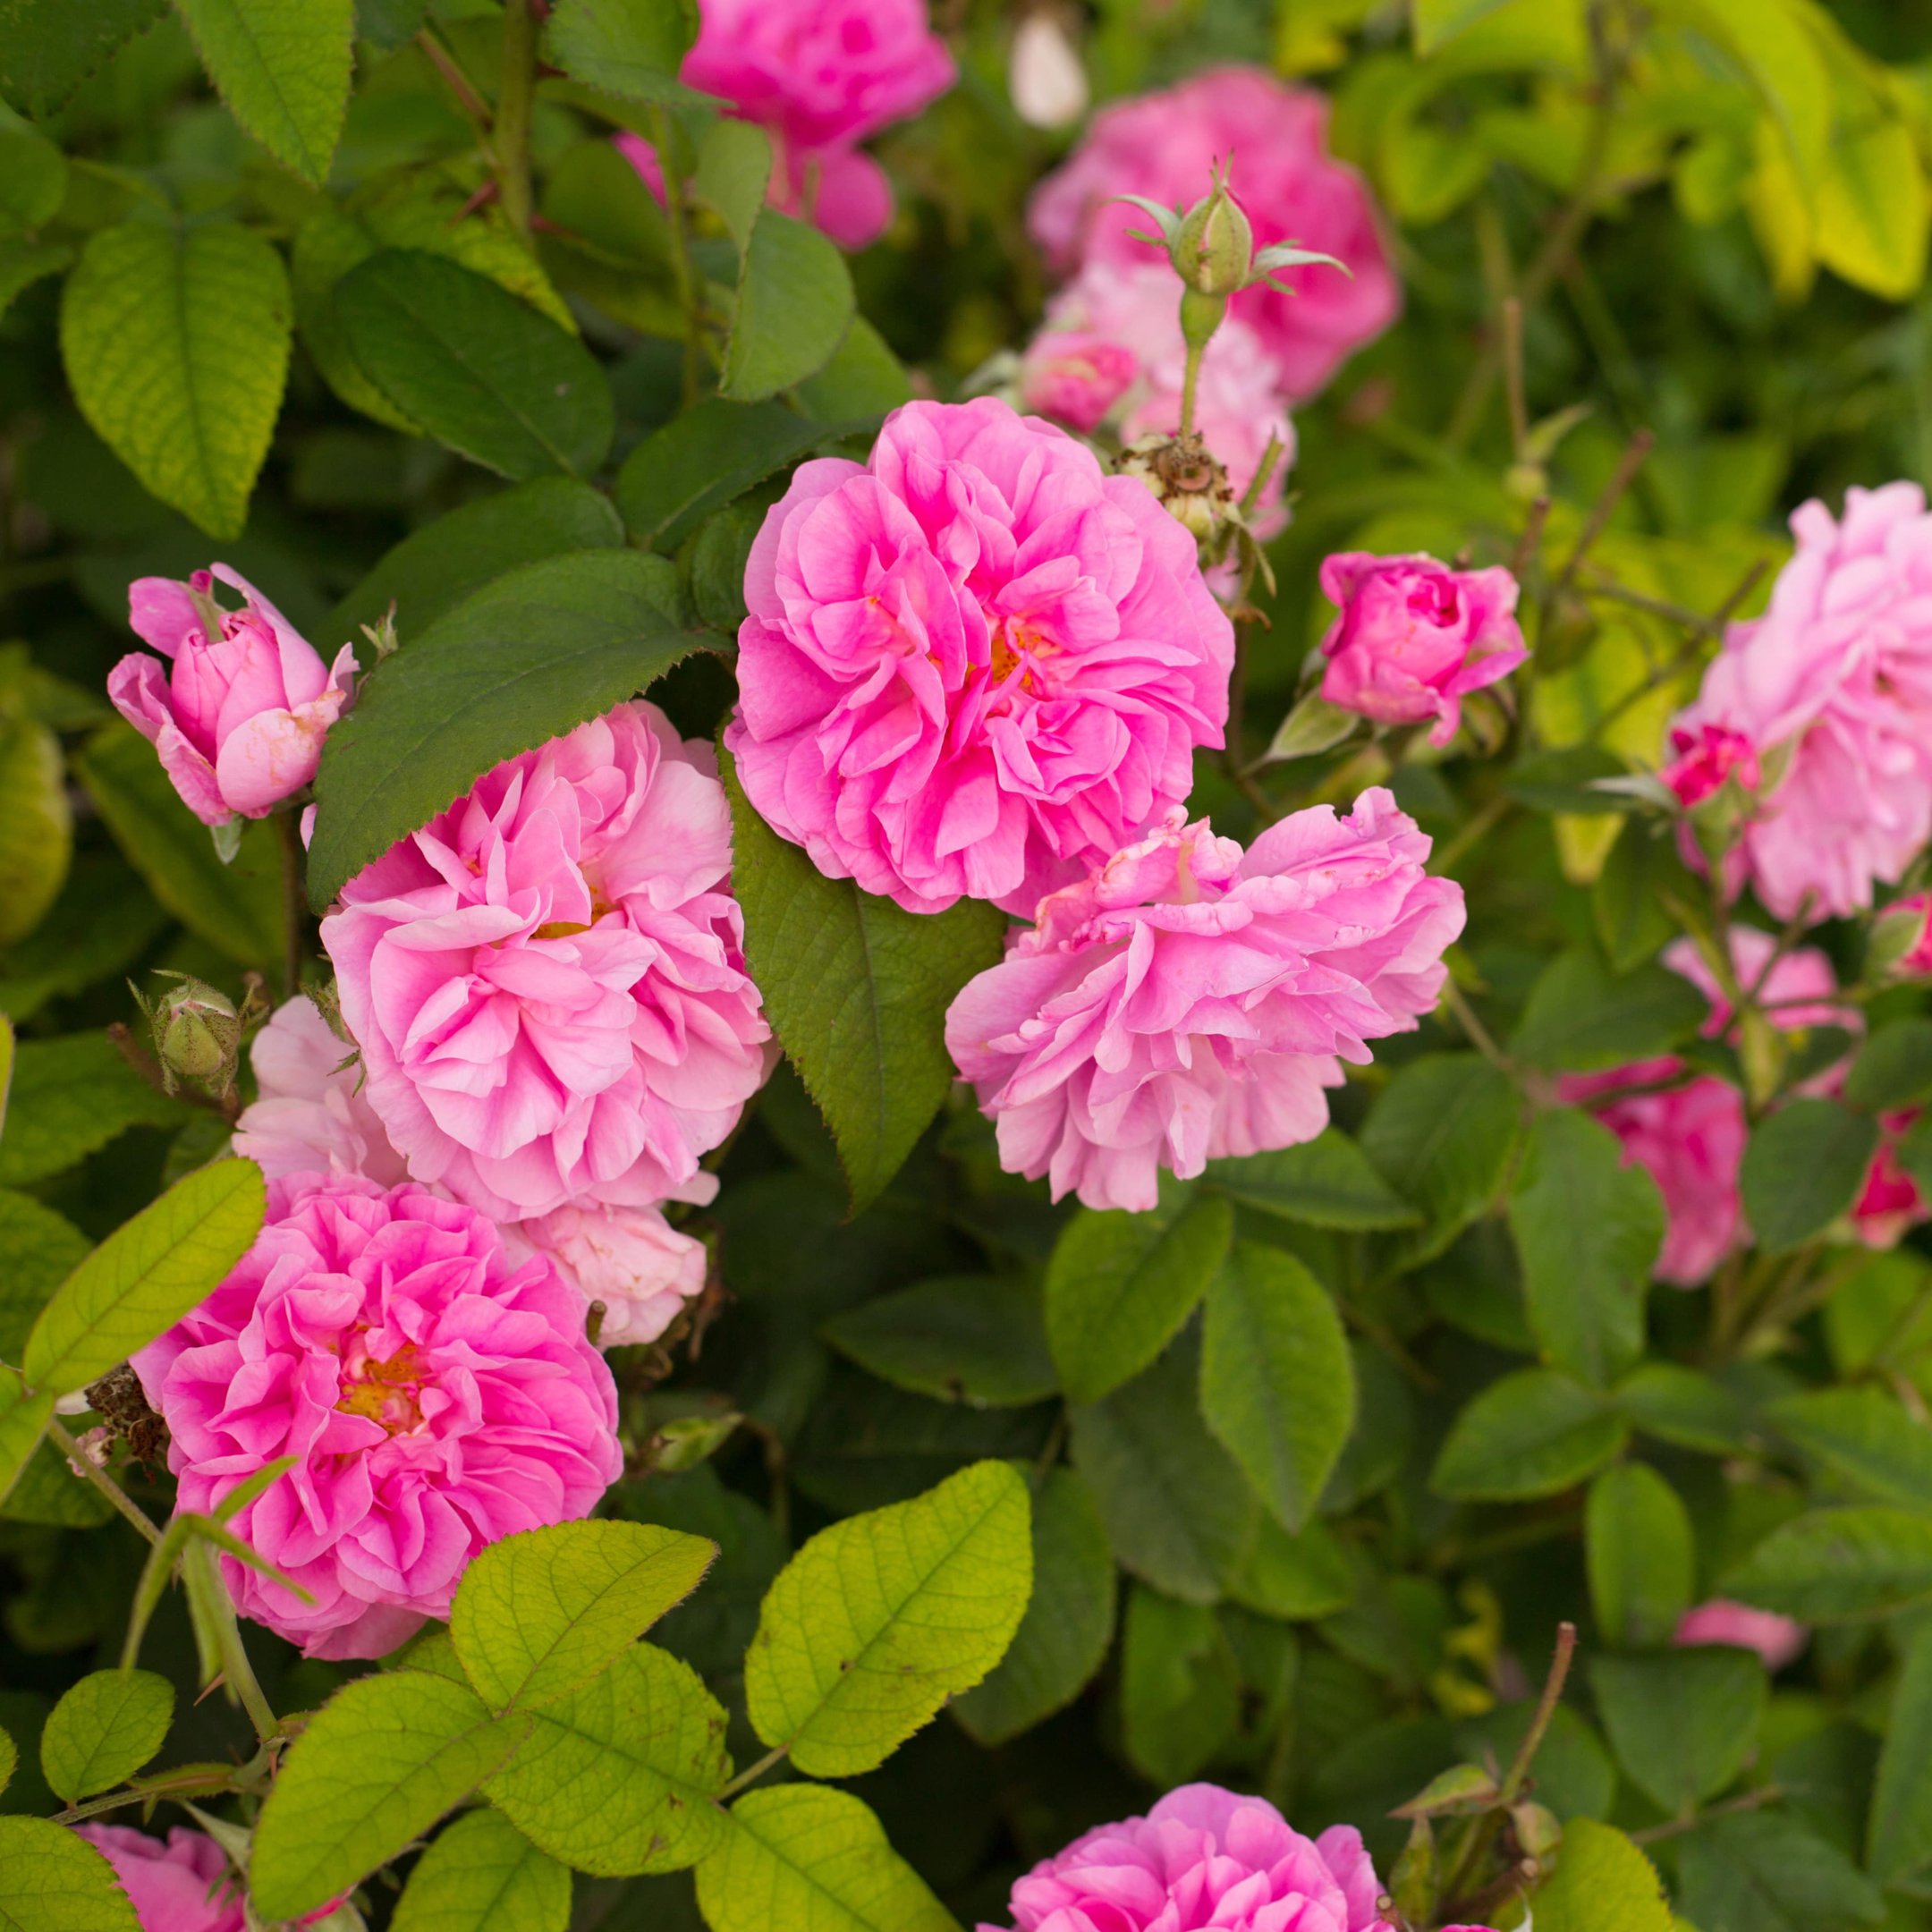 Rosa Damascena flower, those rose flowers will help to produce that beautiful rose essential oil!